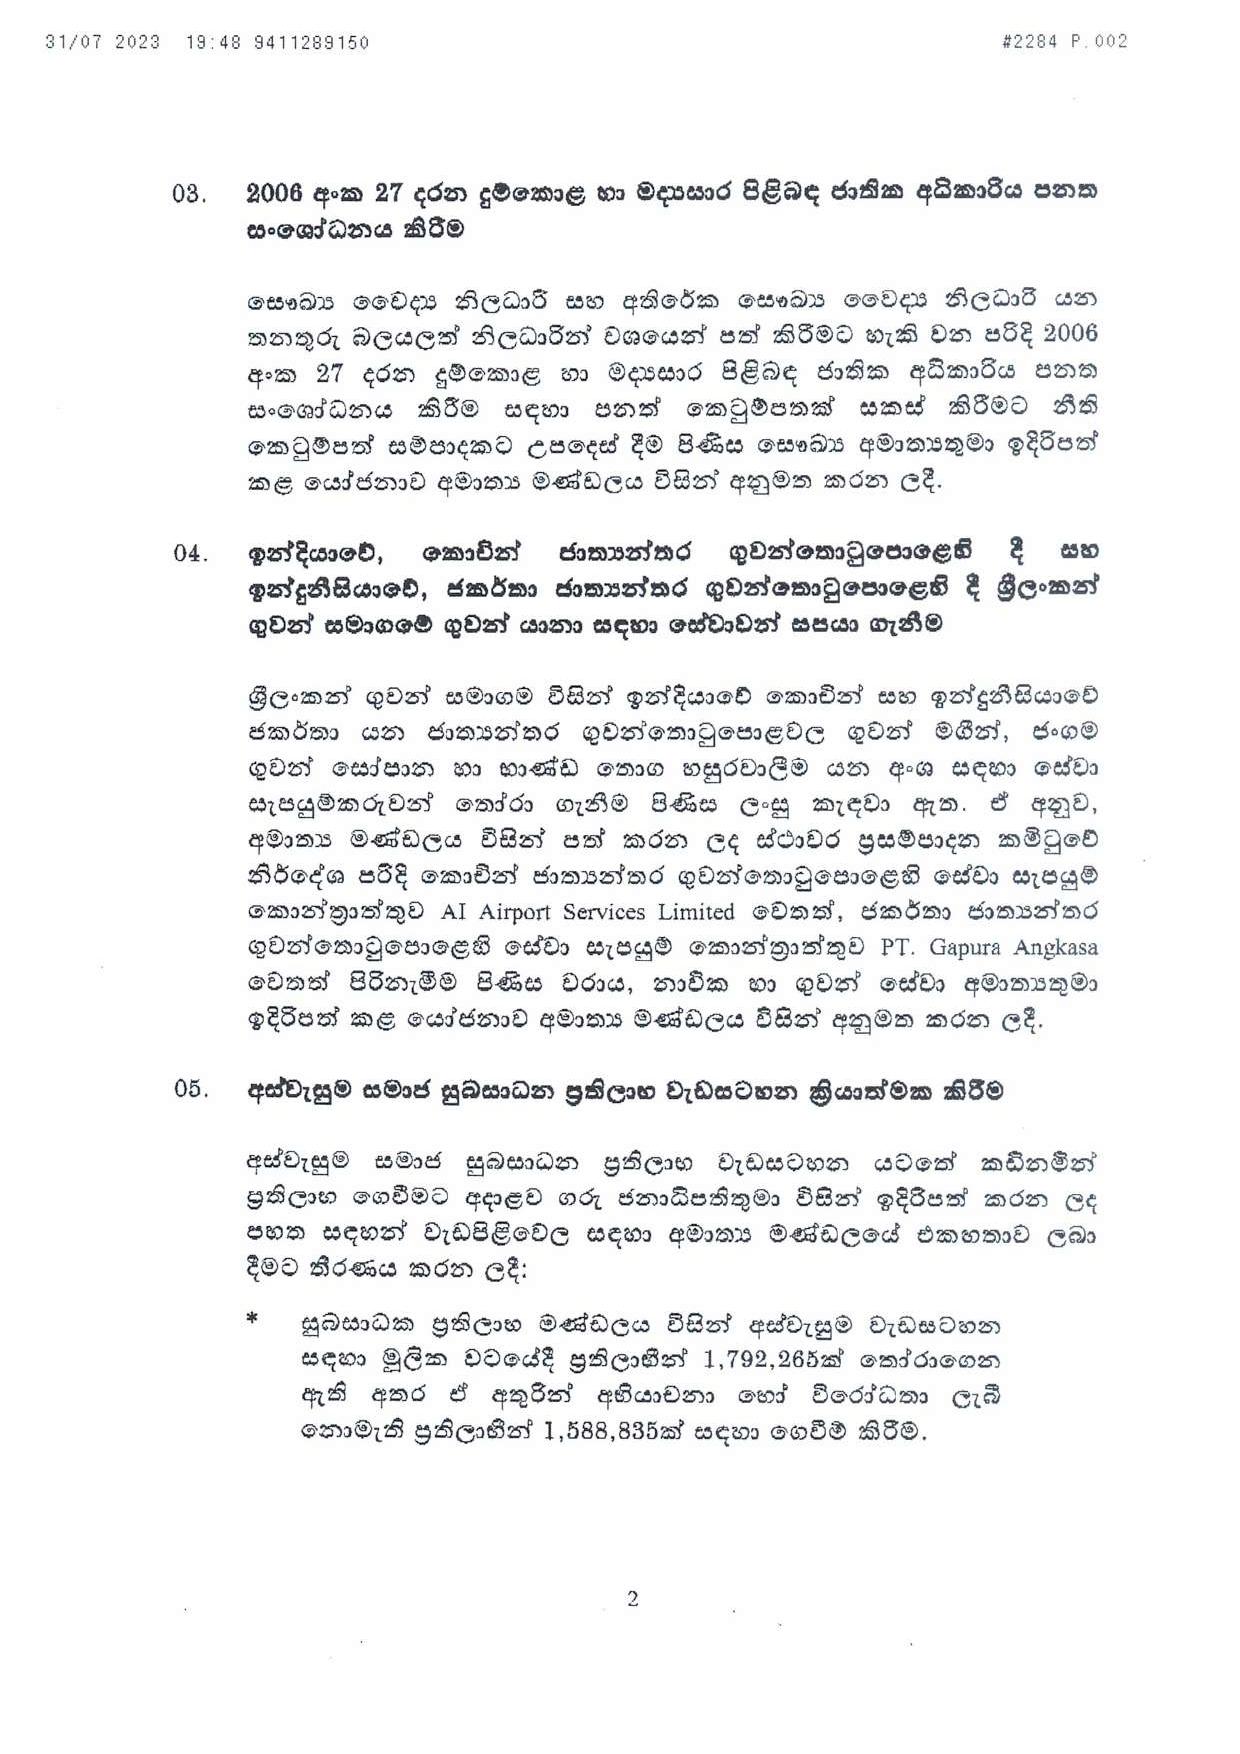 Cabinet Decision on 31.07.2023 page 002